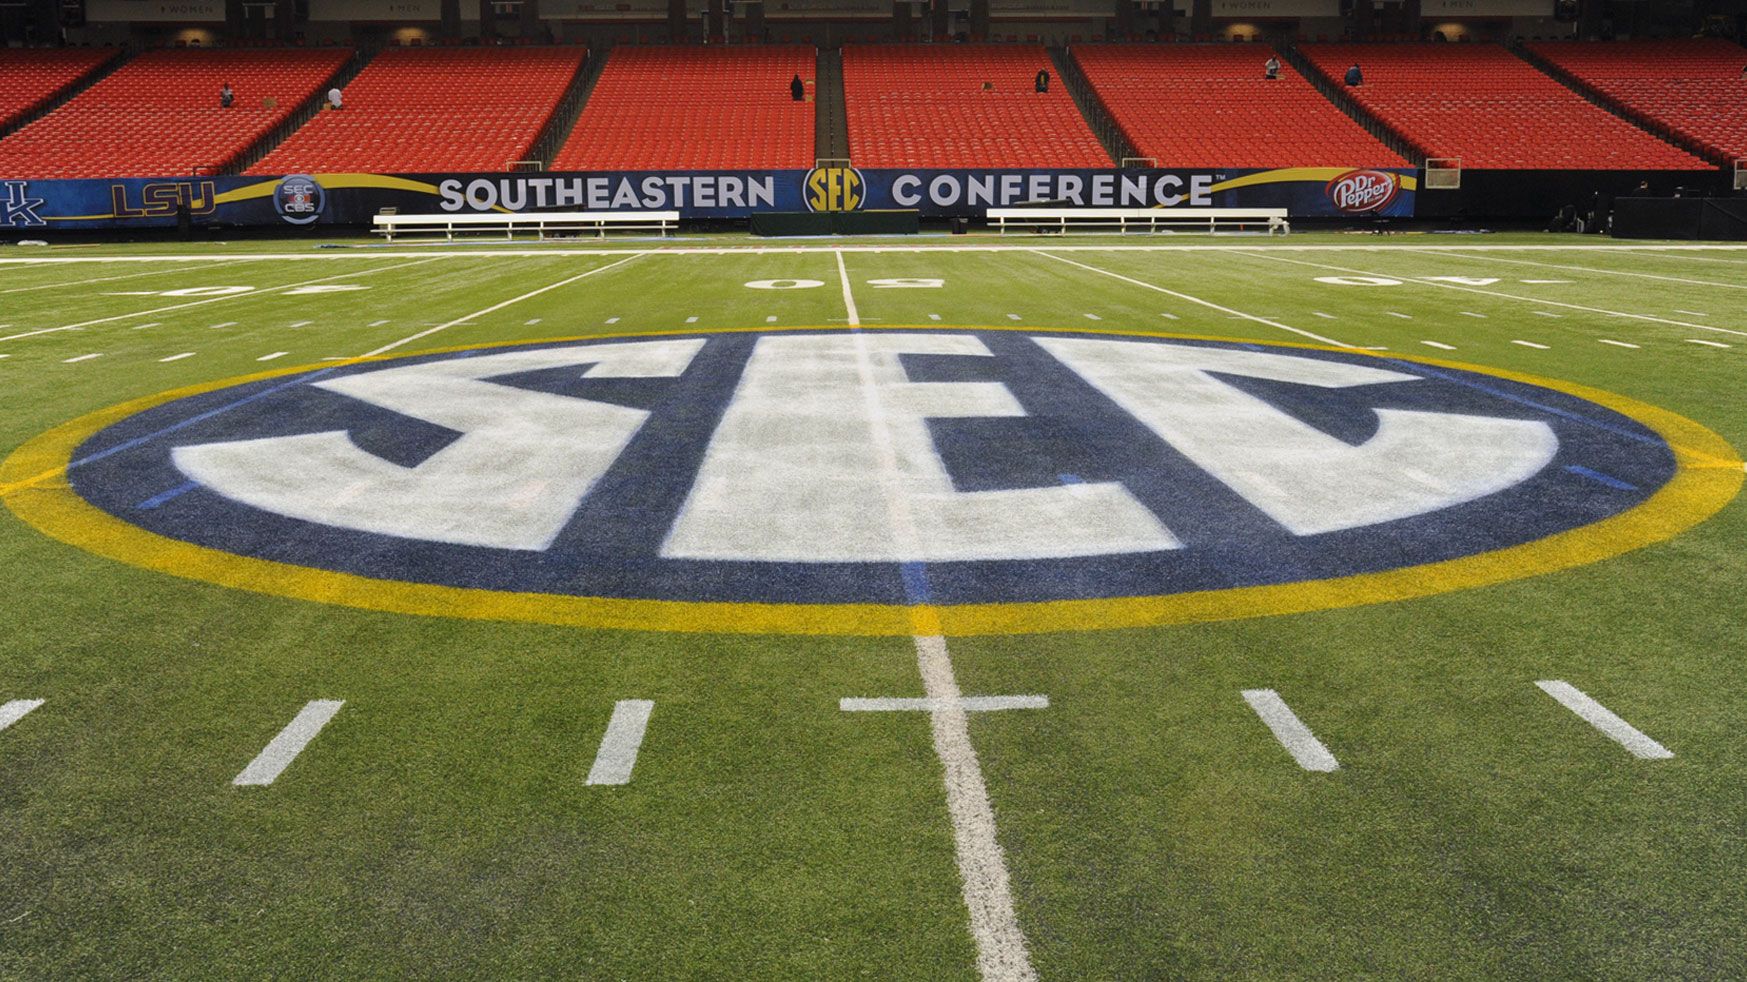 Previewing the SEC Championship